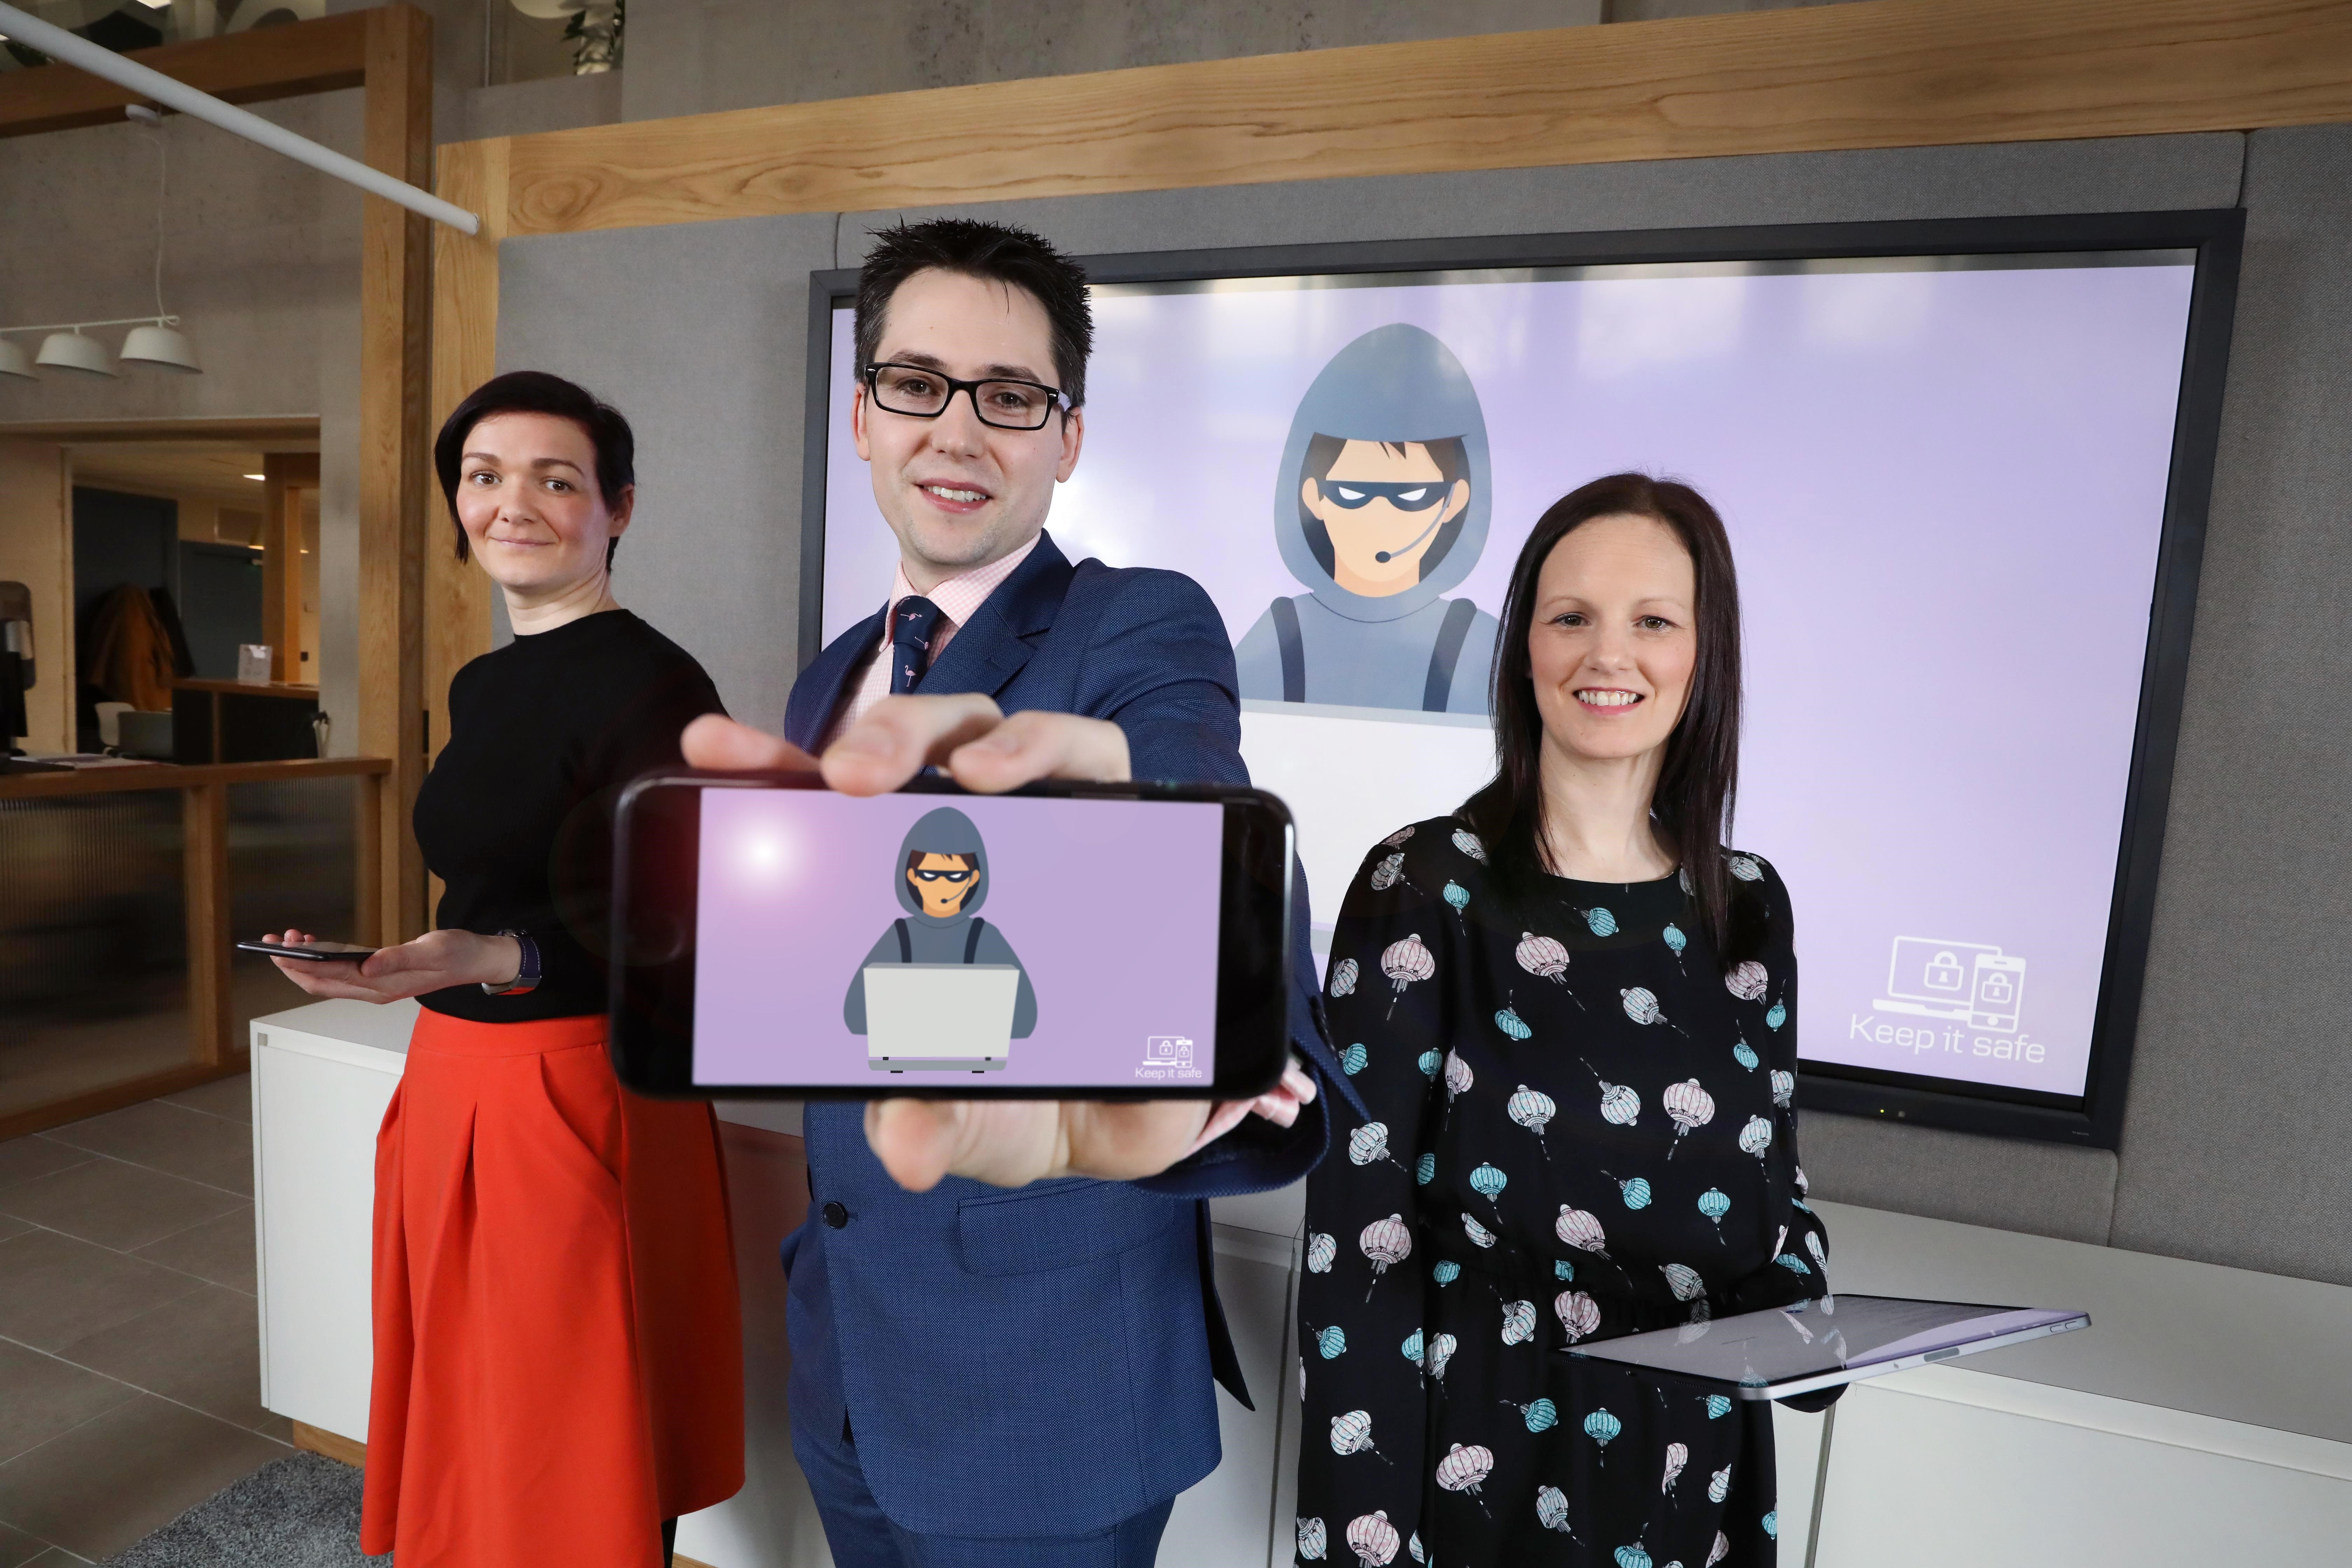 Two women stand either side of a man. They are holding tablets. The man is holding a phone to the camera, and on the screen is a purple background with a suspicious character on a computer. The same image is on a large TV behind the people.